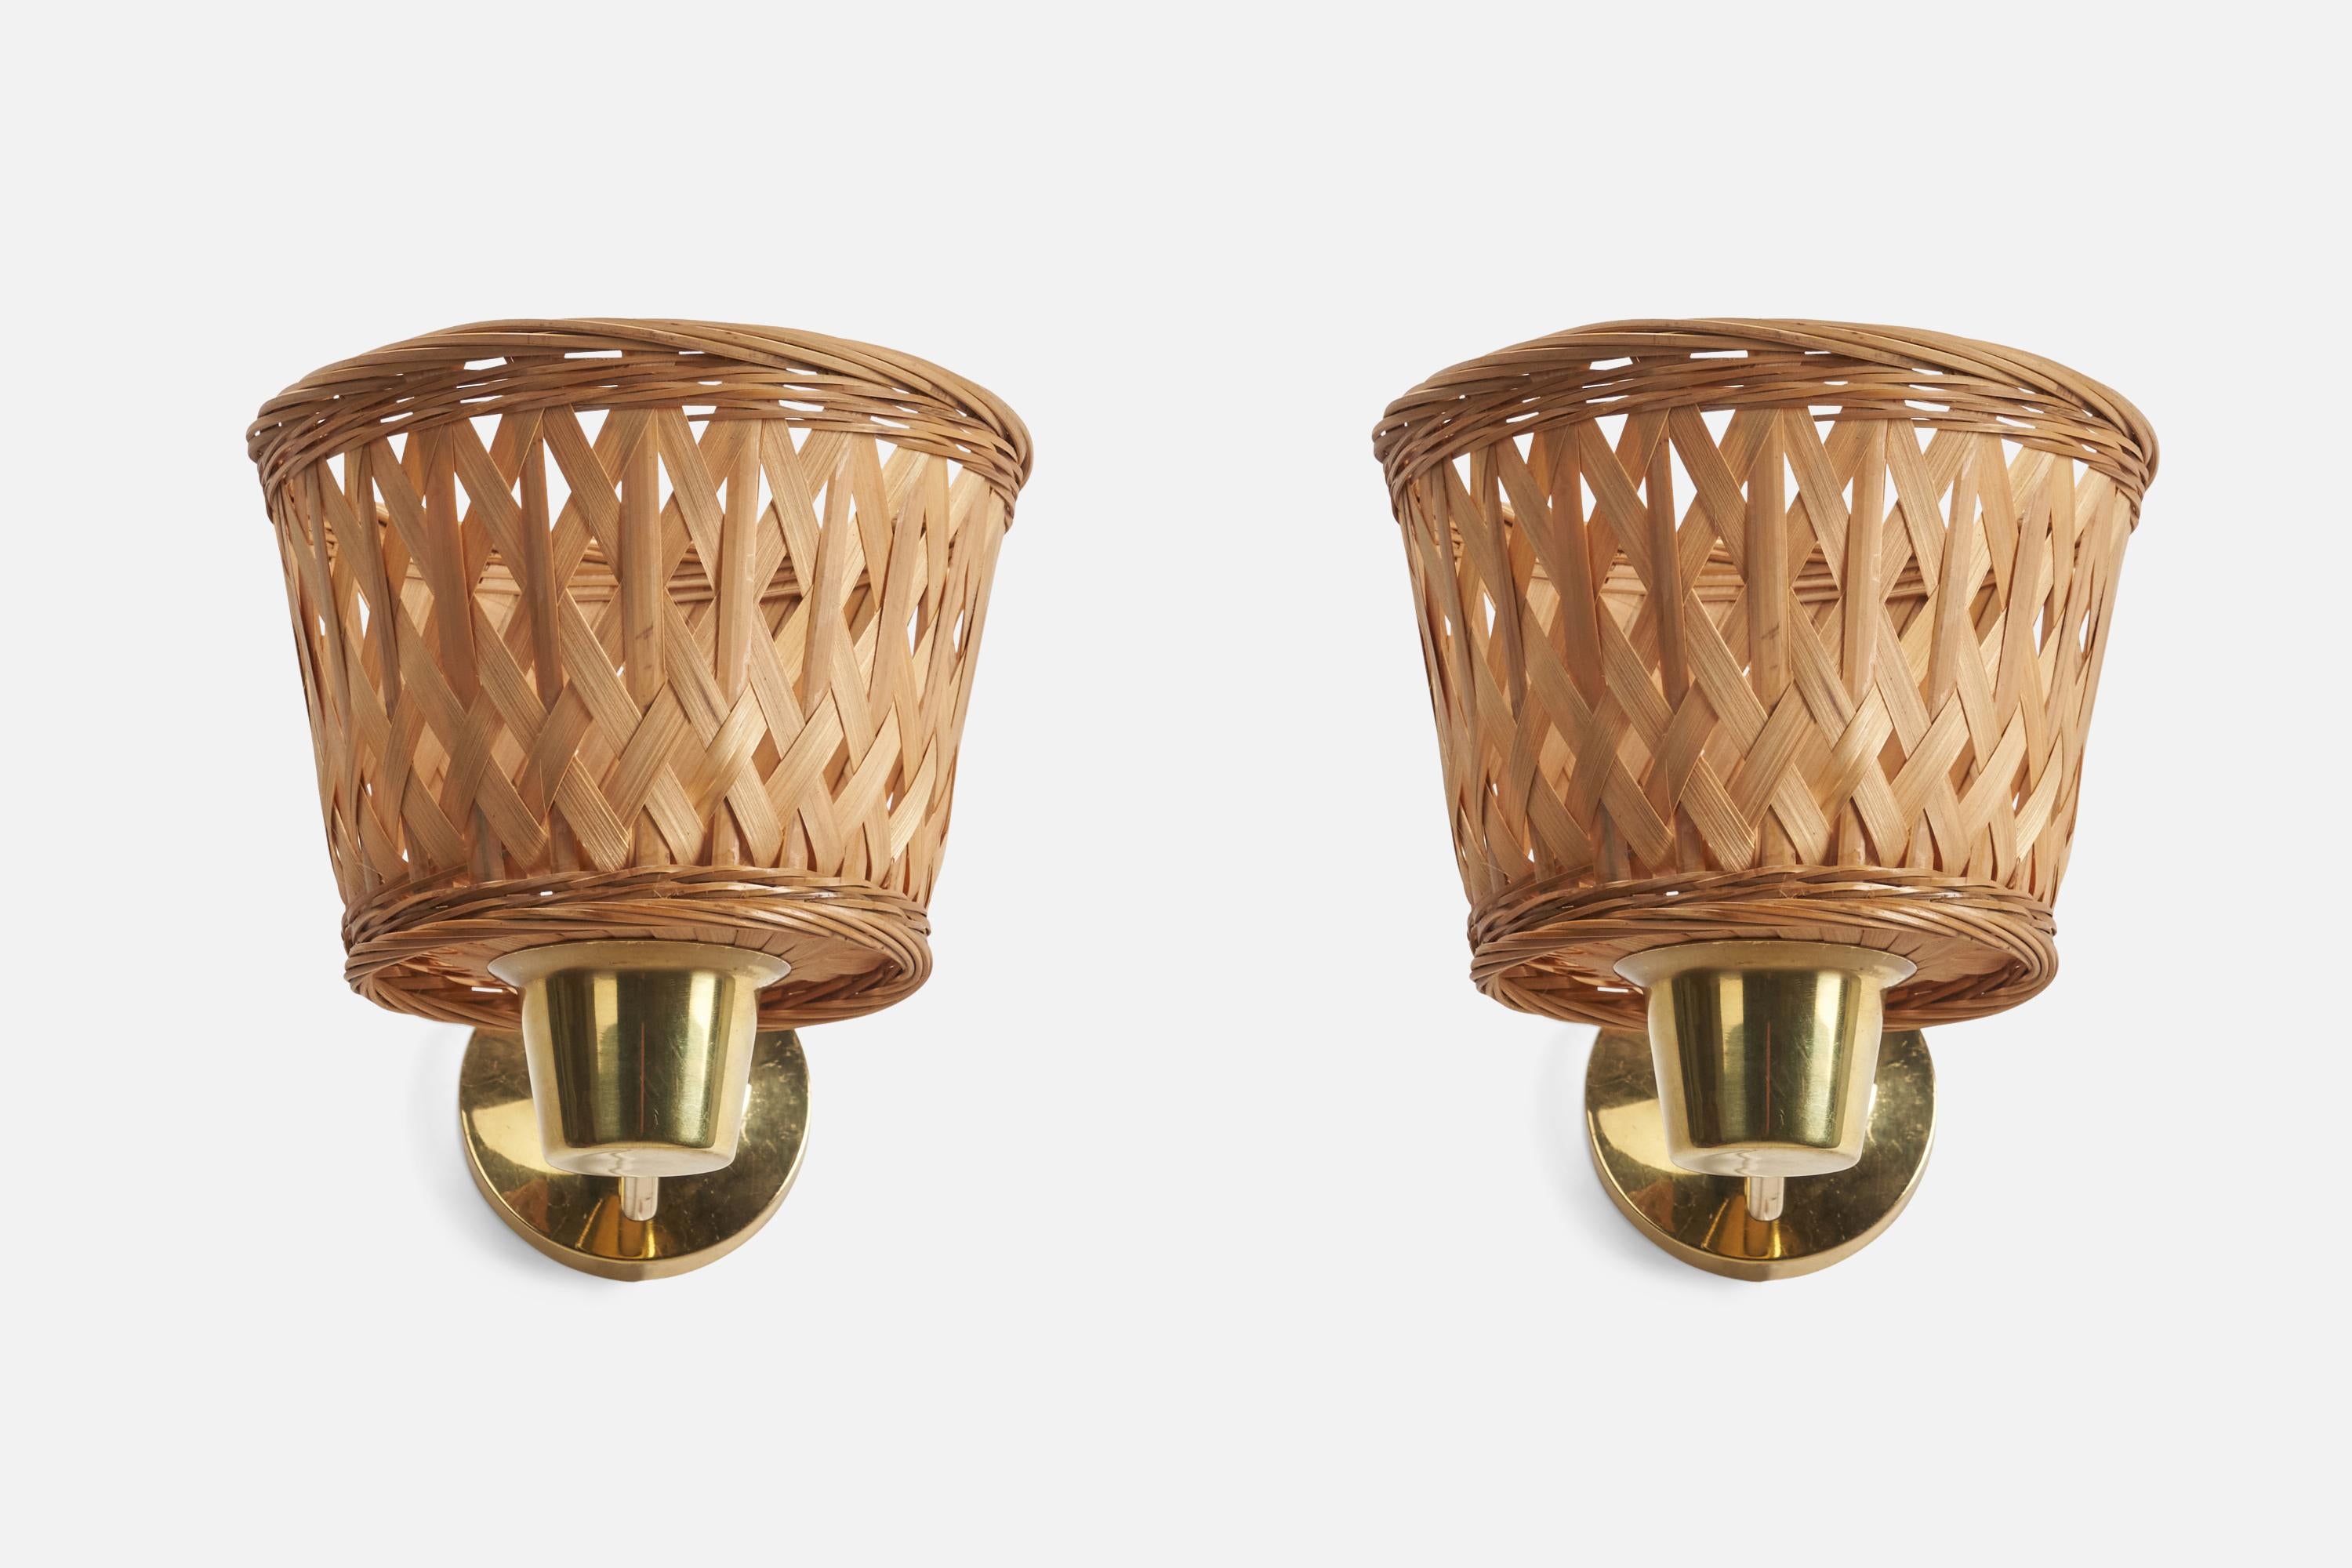 A pair of brass and rattan wall lights designed and produced by a Swedish Designer, Sweden, 1970s.

Dimensions of Back Plate (inches) : 3.5 x 3.5 x 0.9 (Height x Width x Depth)

Sockets take E-14 bulbs.

There is no maximum wattage stated on